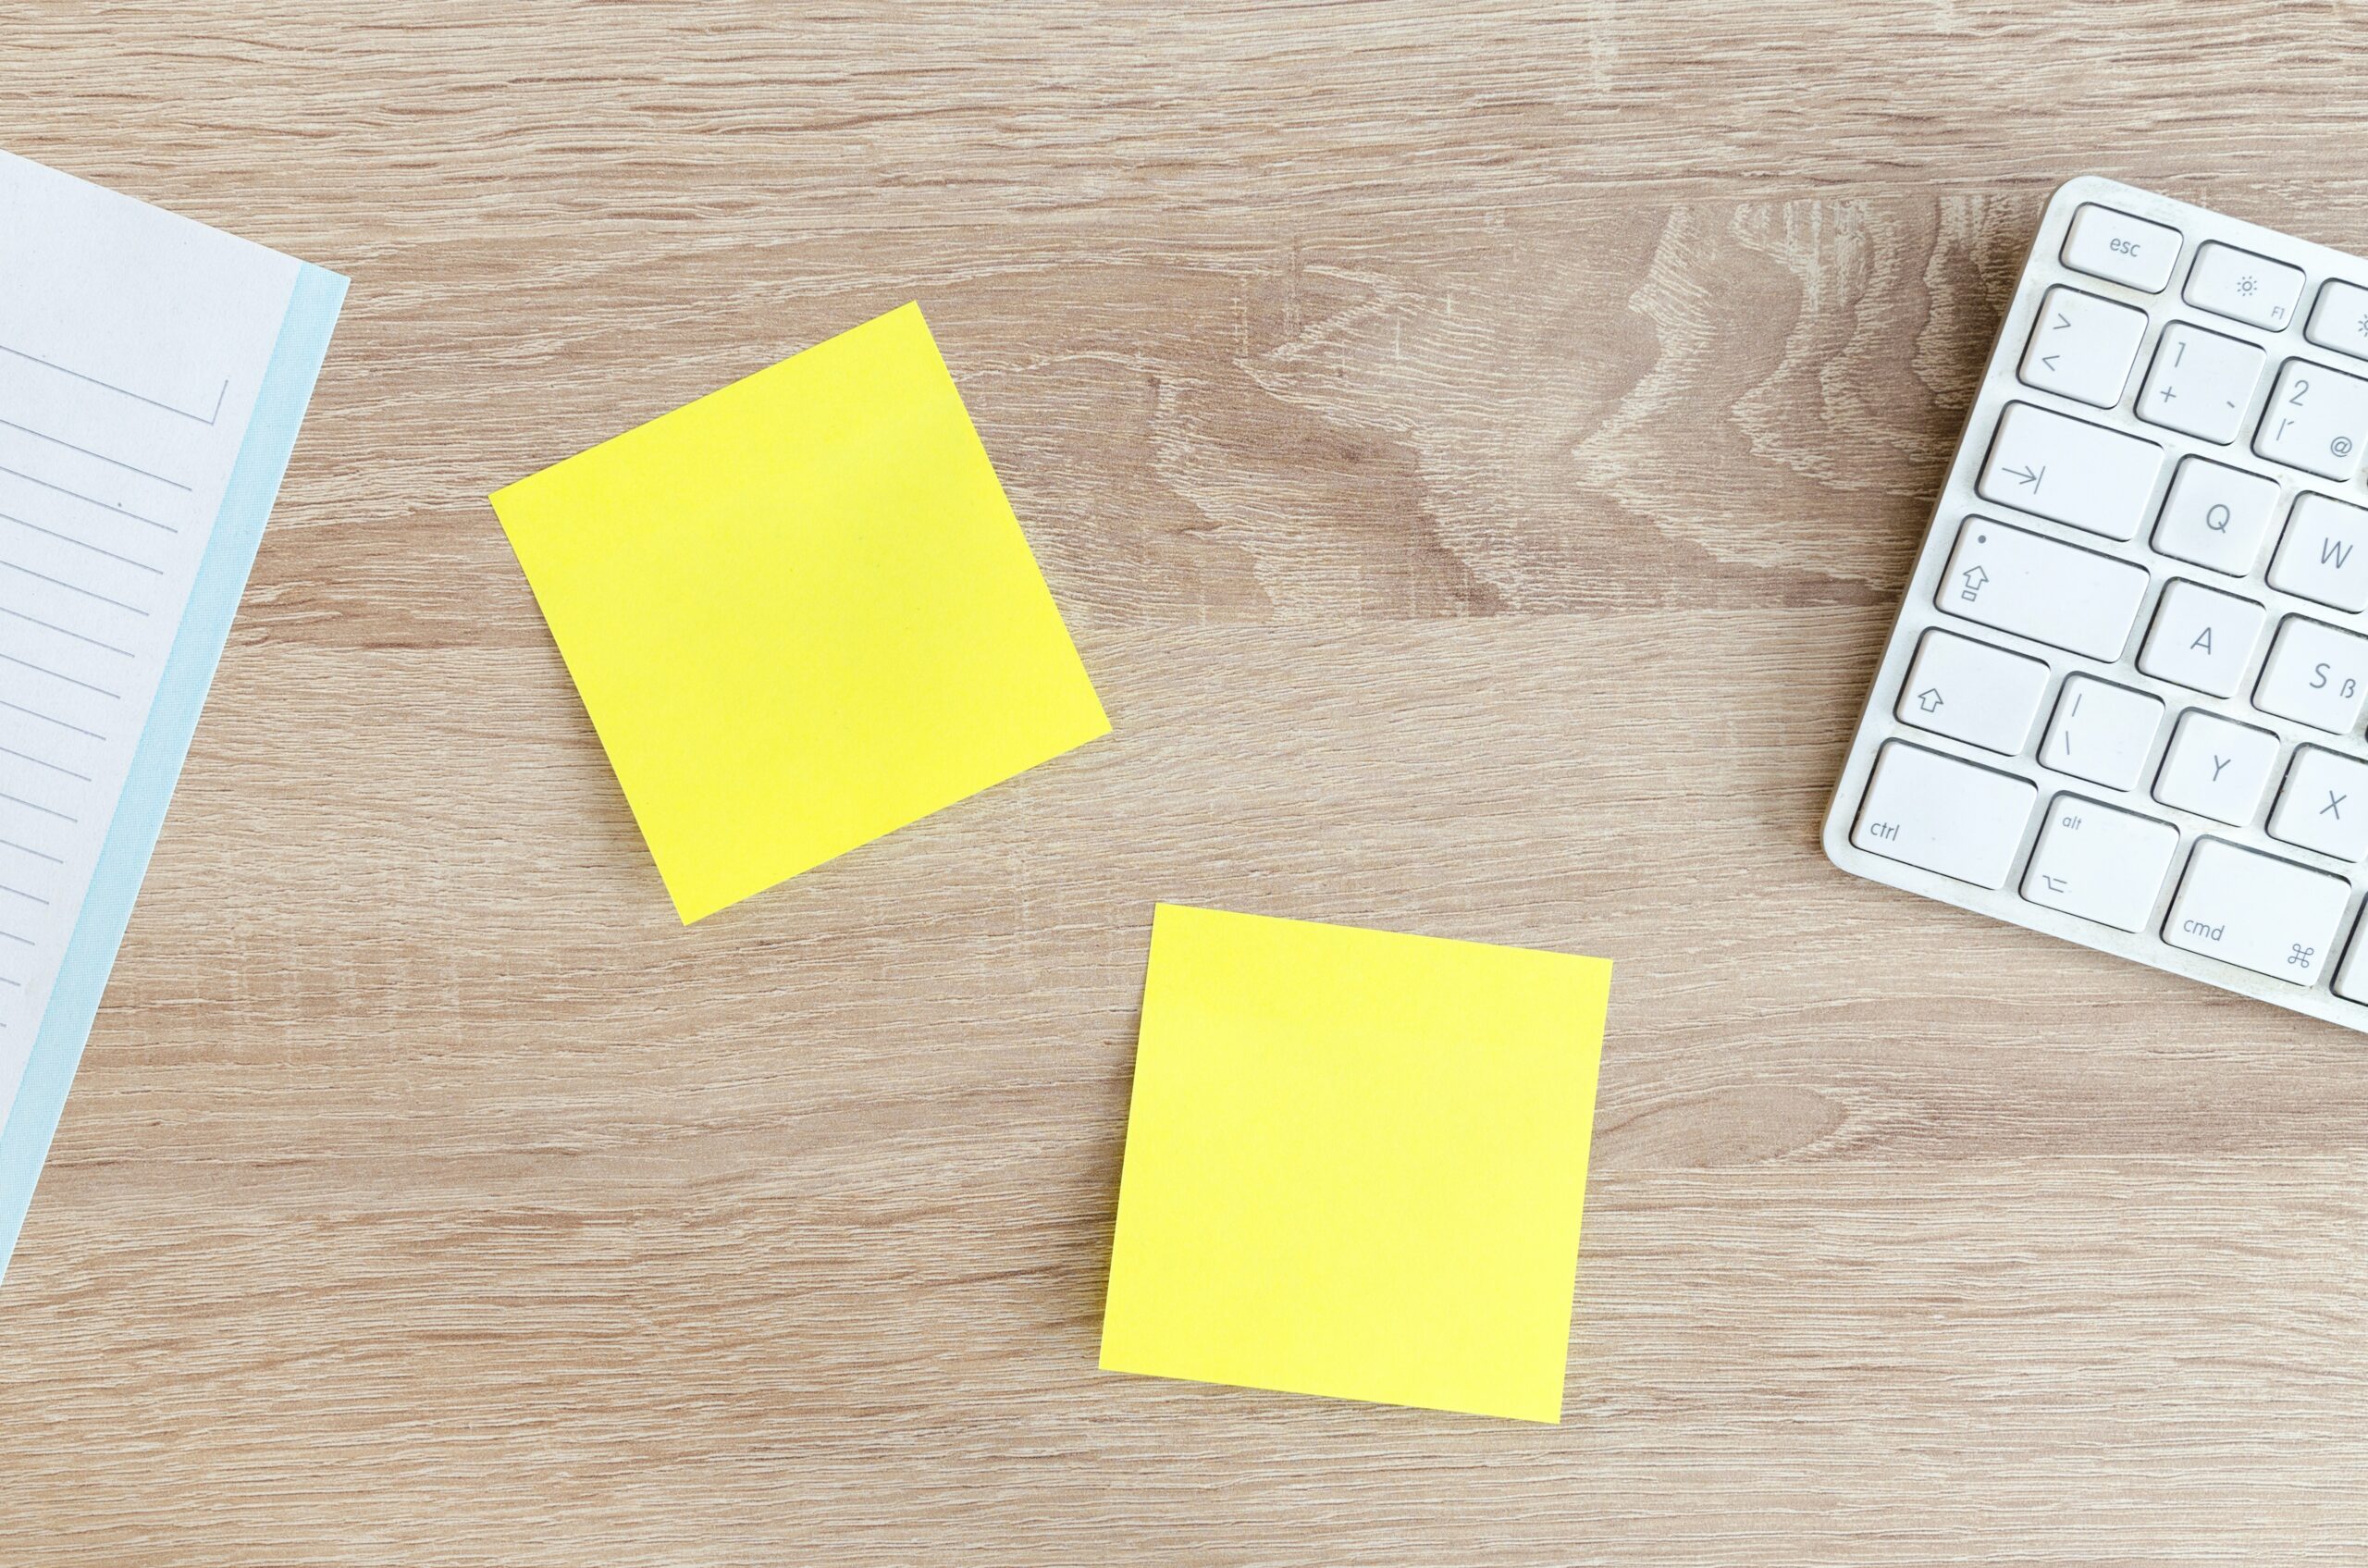 Two yellow sticky notes on a wooden table. There is a white keyboard that can be partially seen on the right side and a white notepad on the left side.